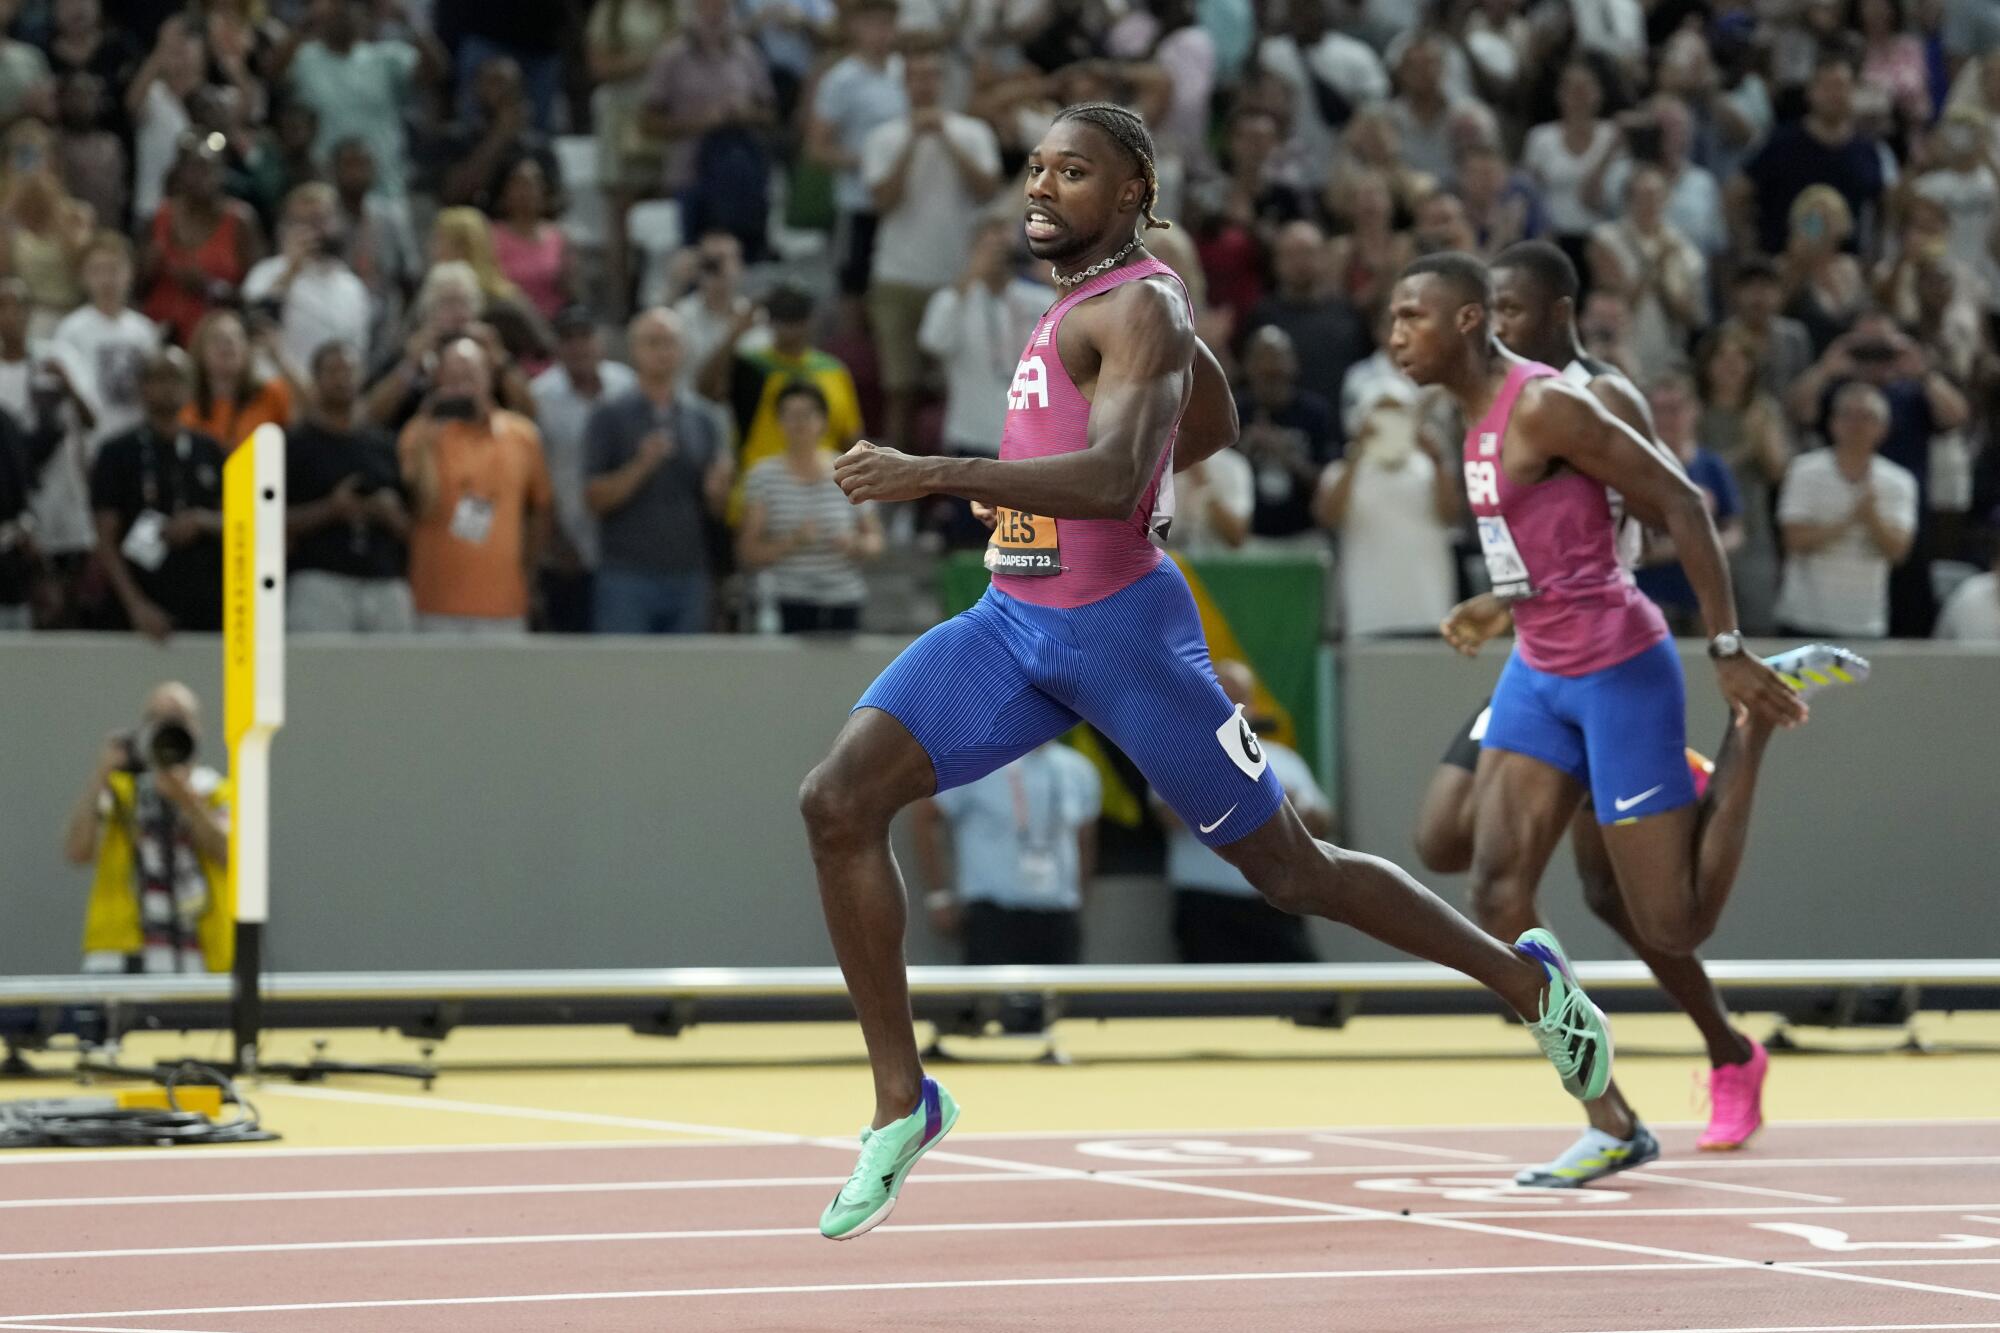 Noah Lyles crosses the finish line to win the gold medal in the 200 meters at the world track championships on Friday.